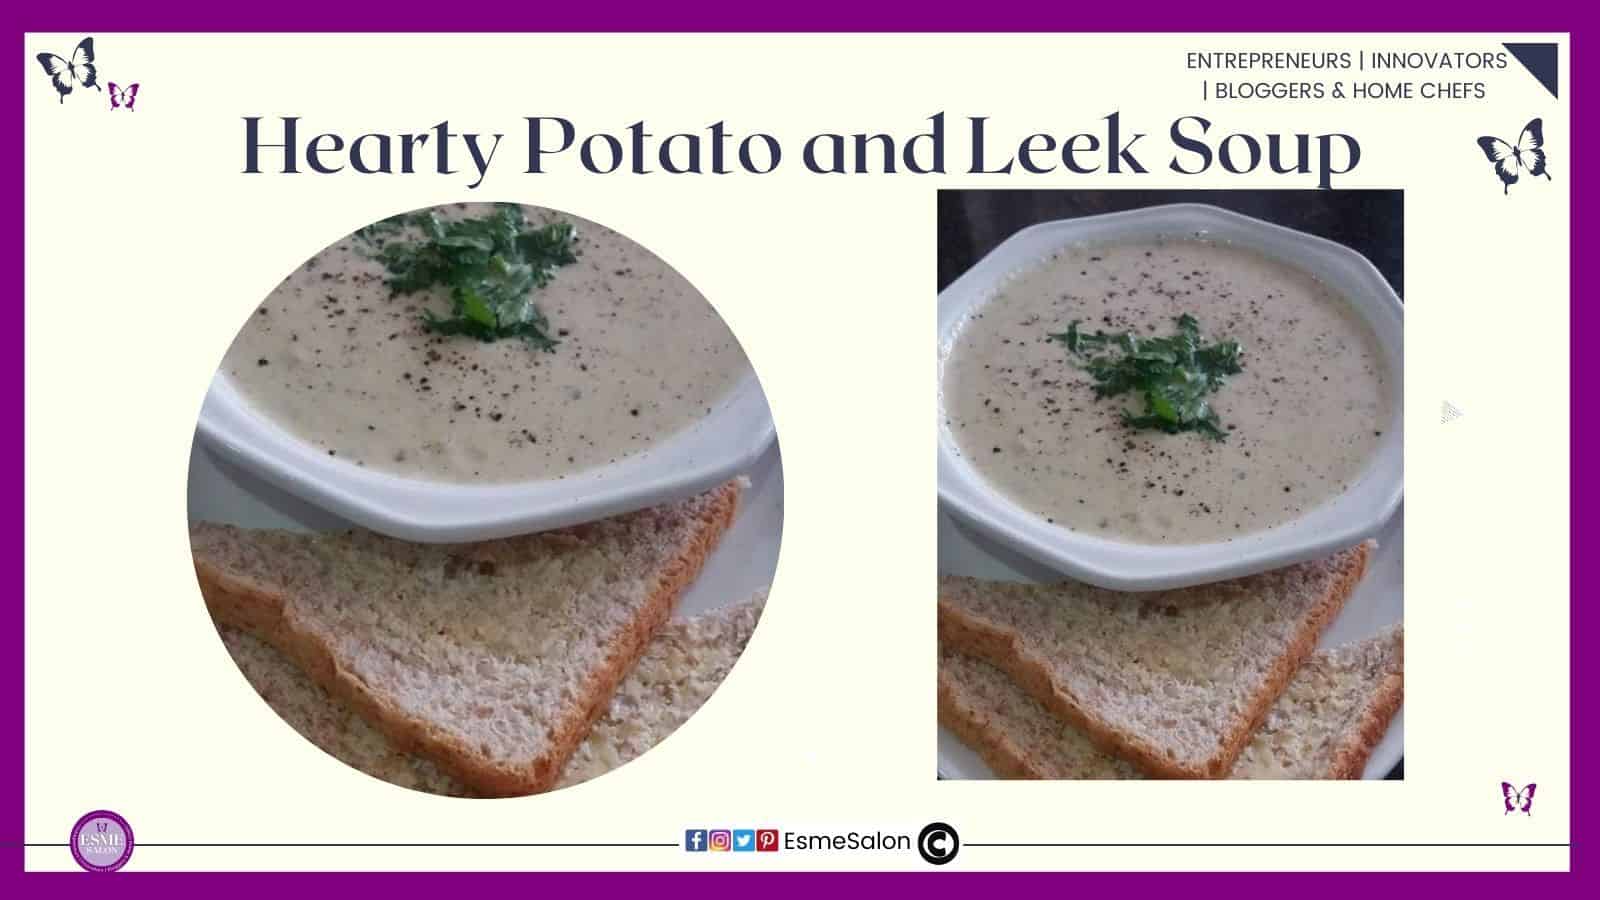 an image of Hearty Potato and Leek Soup in a white soup bowl with triangle slices of bread